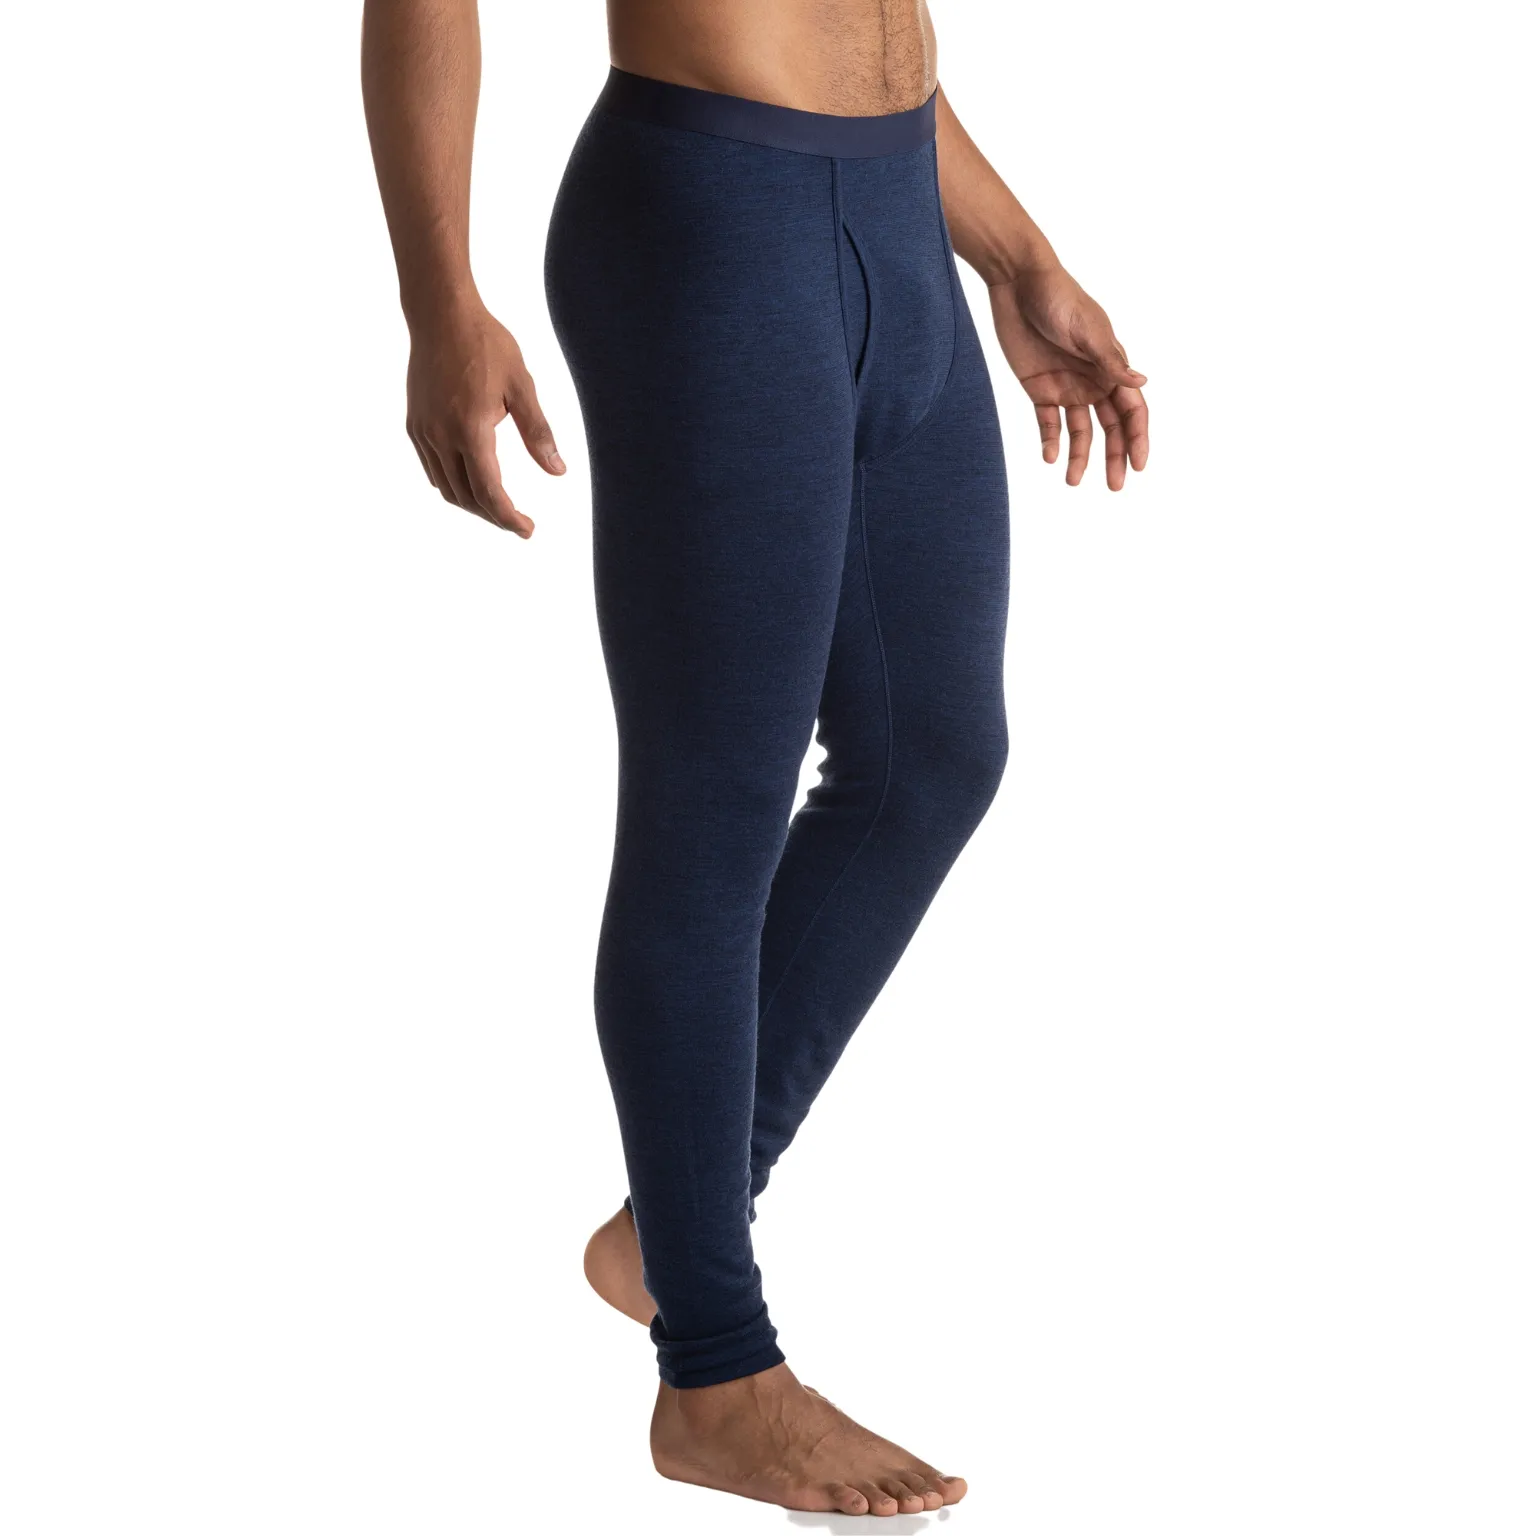 Fleece Long Johns manufacturing with trendy design